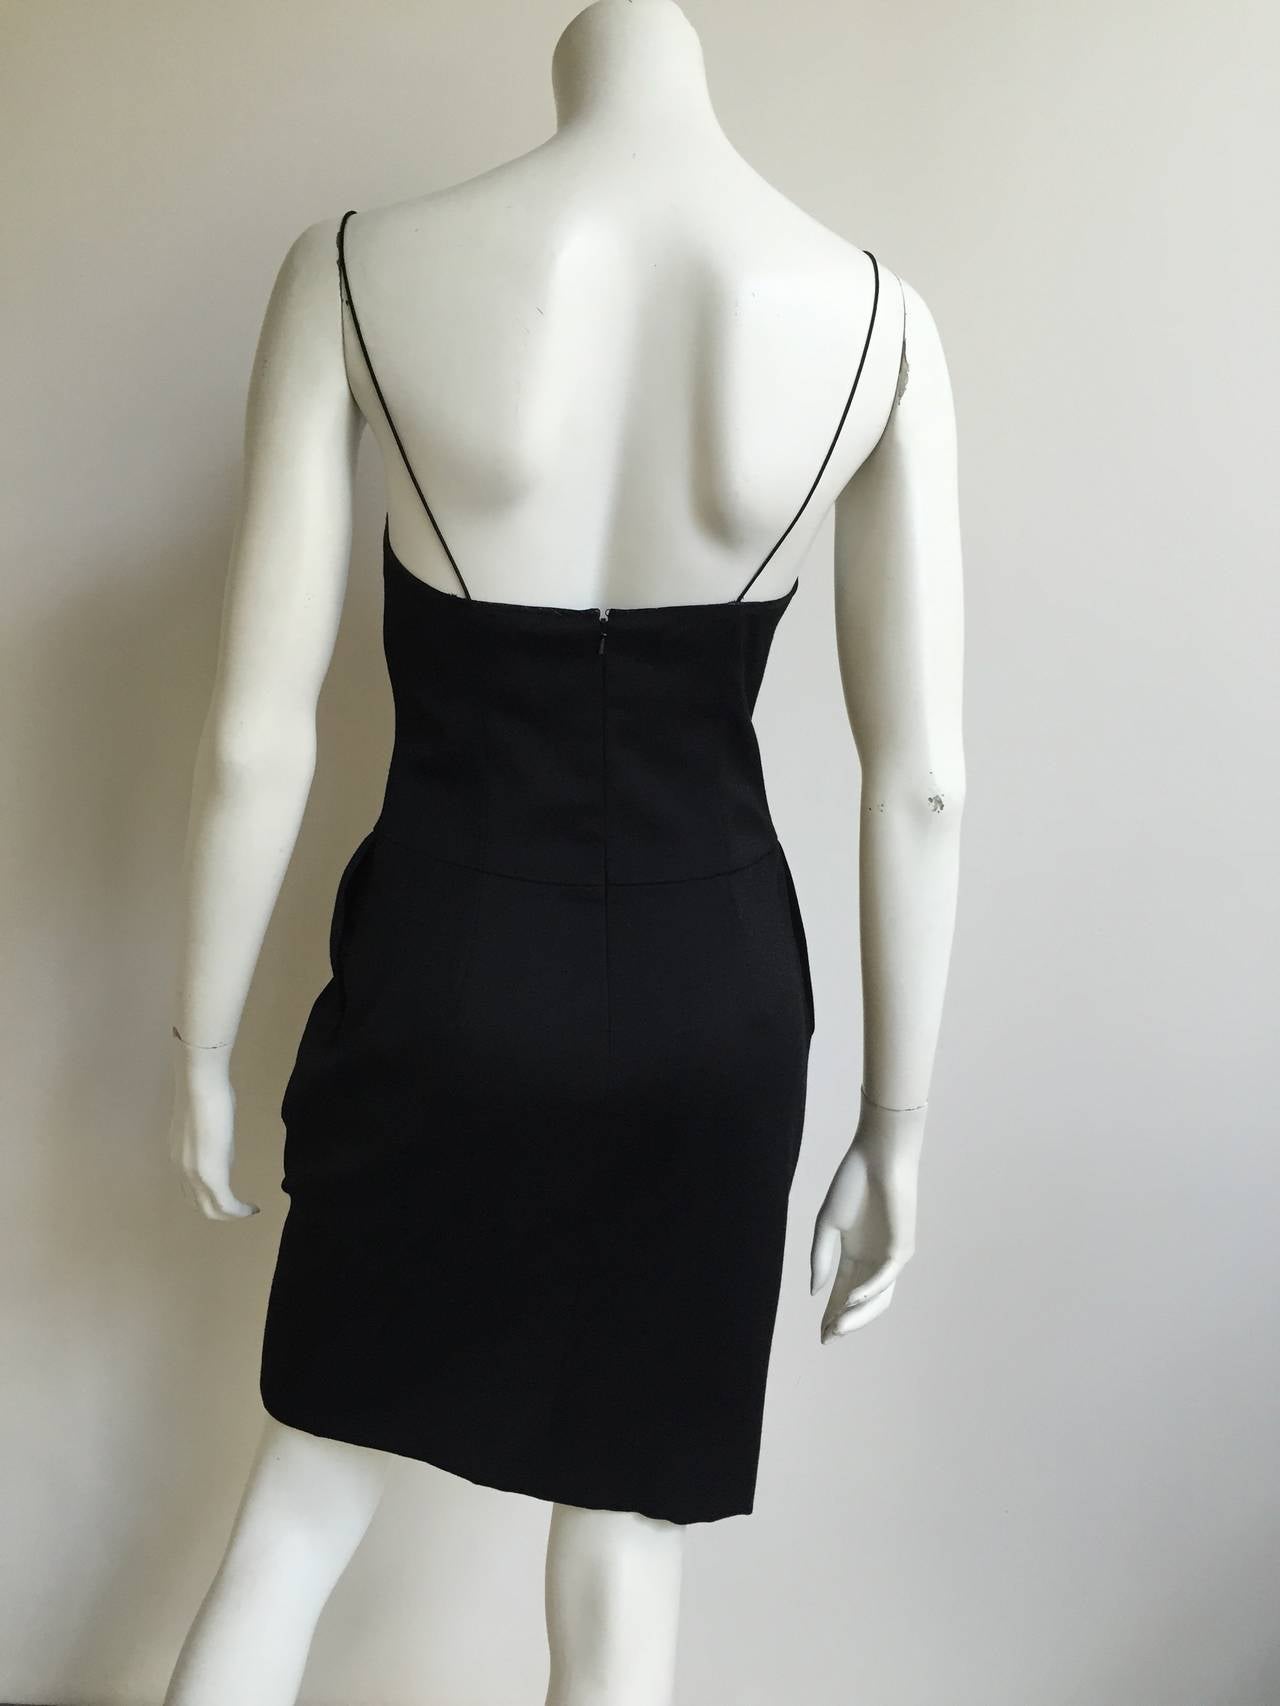 Geoffrey Beene Mr. Beene 90s cocktail dress with pockets size 4. 1